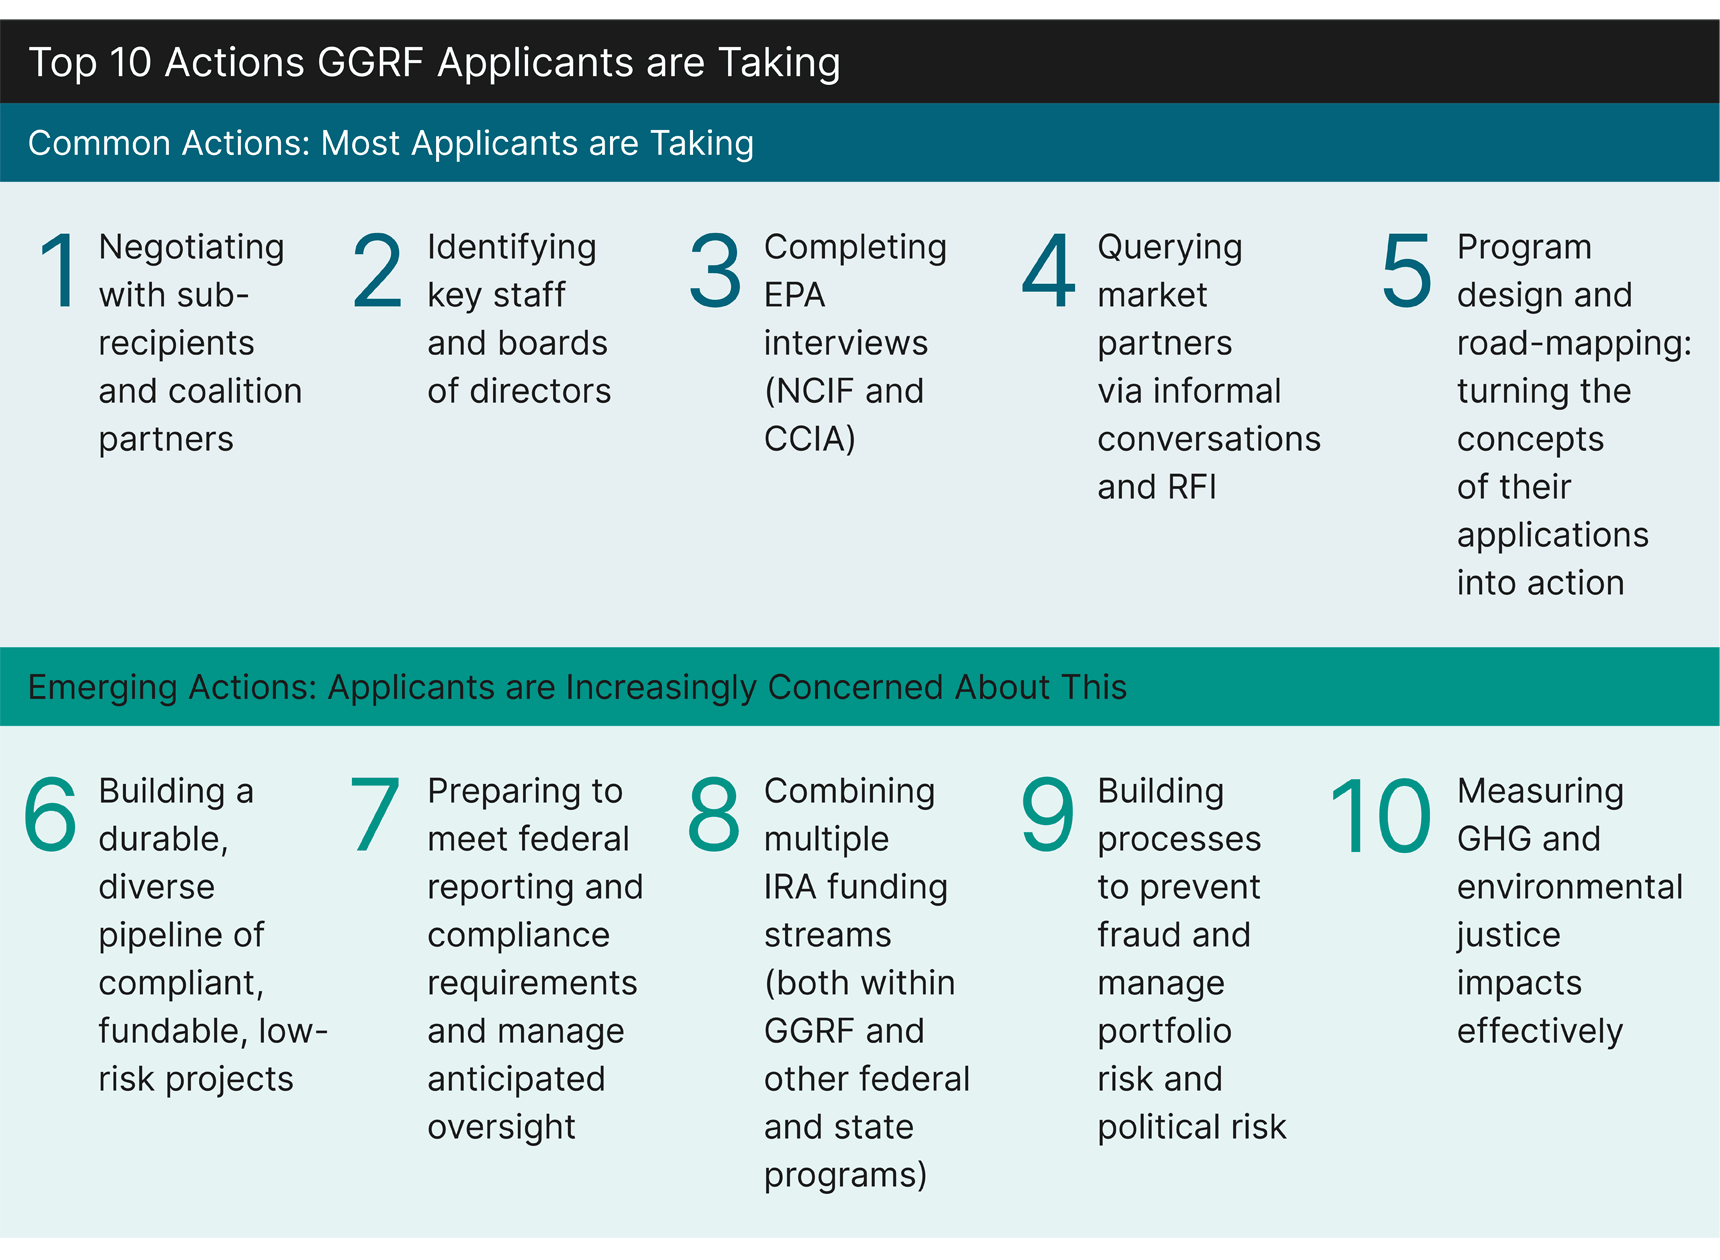 ggrf-top-10-actions-fs-a-graphics-24-2-29